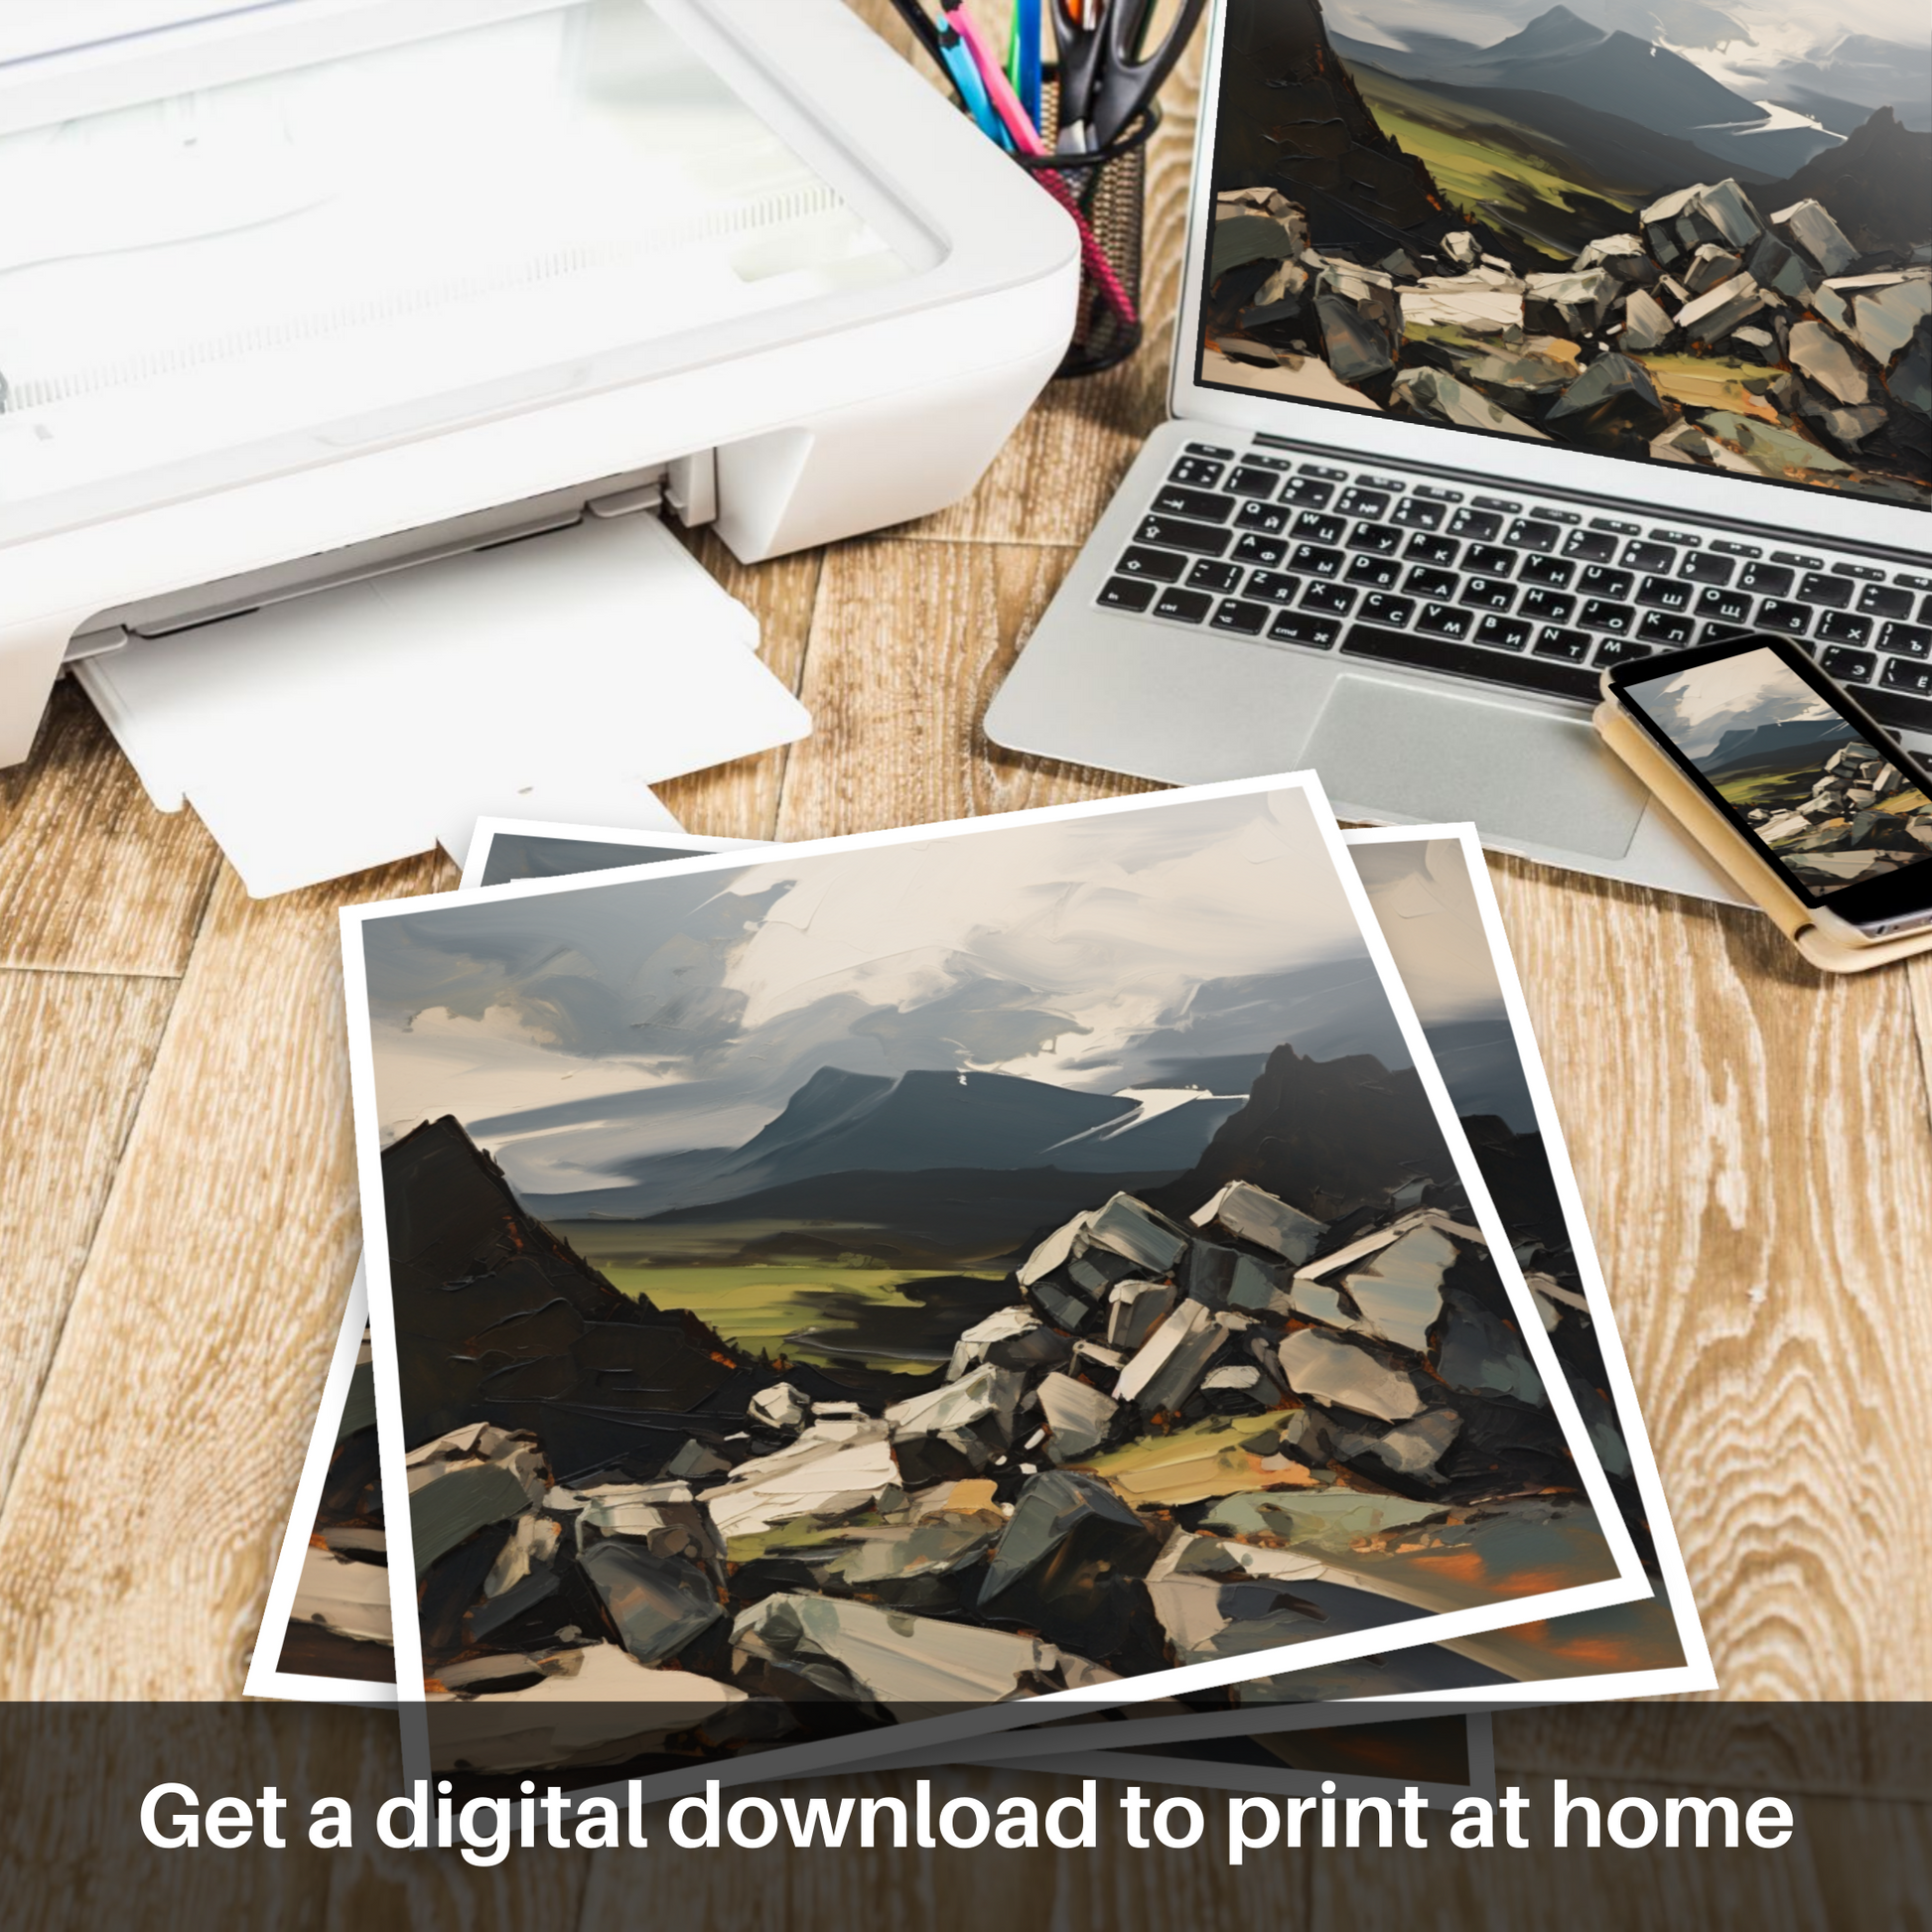 Downloadable and printable picture of Cairn Gorm